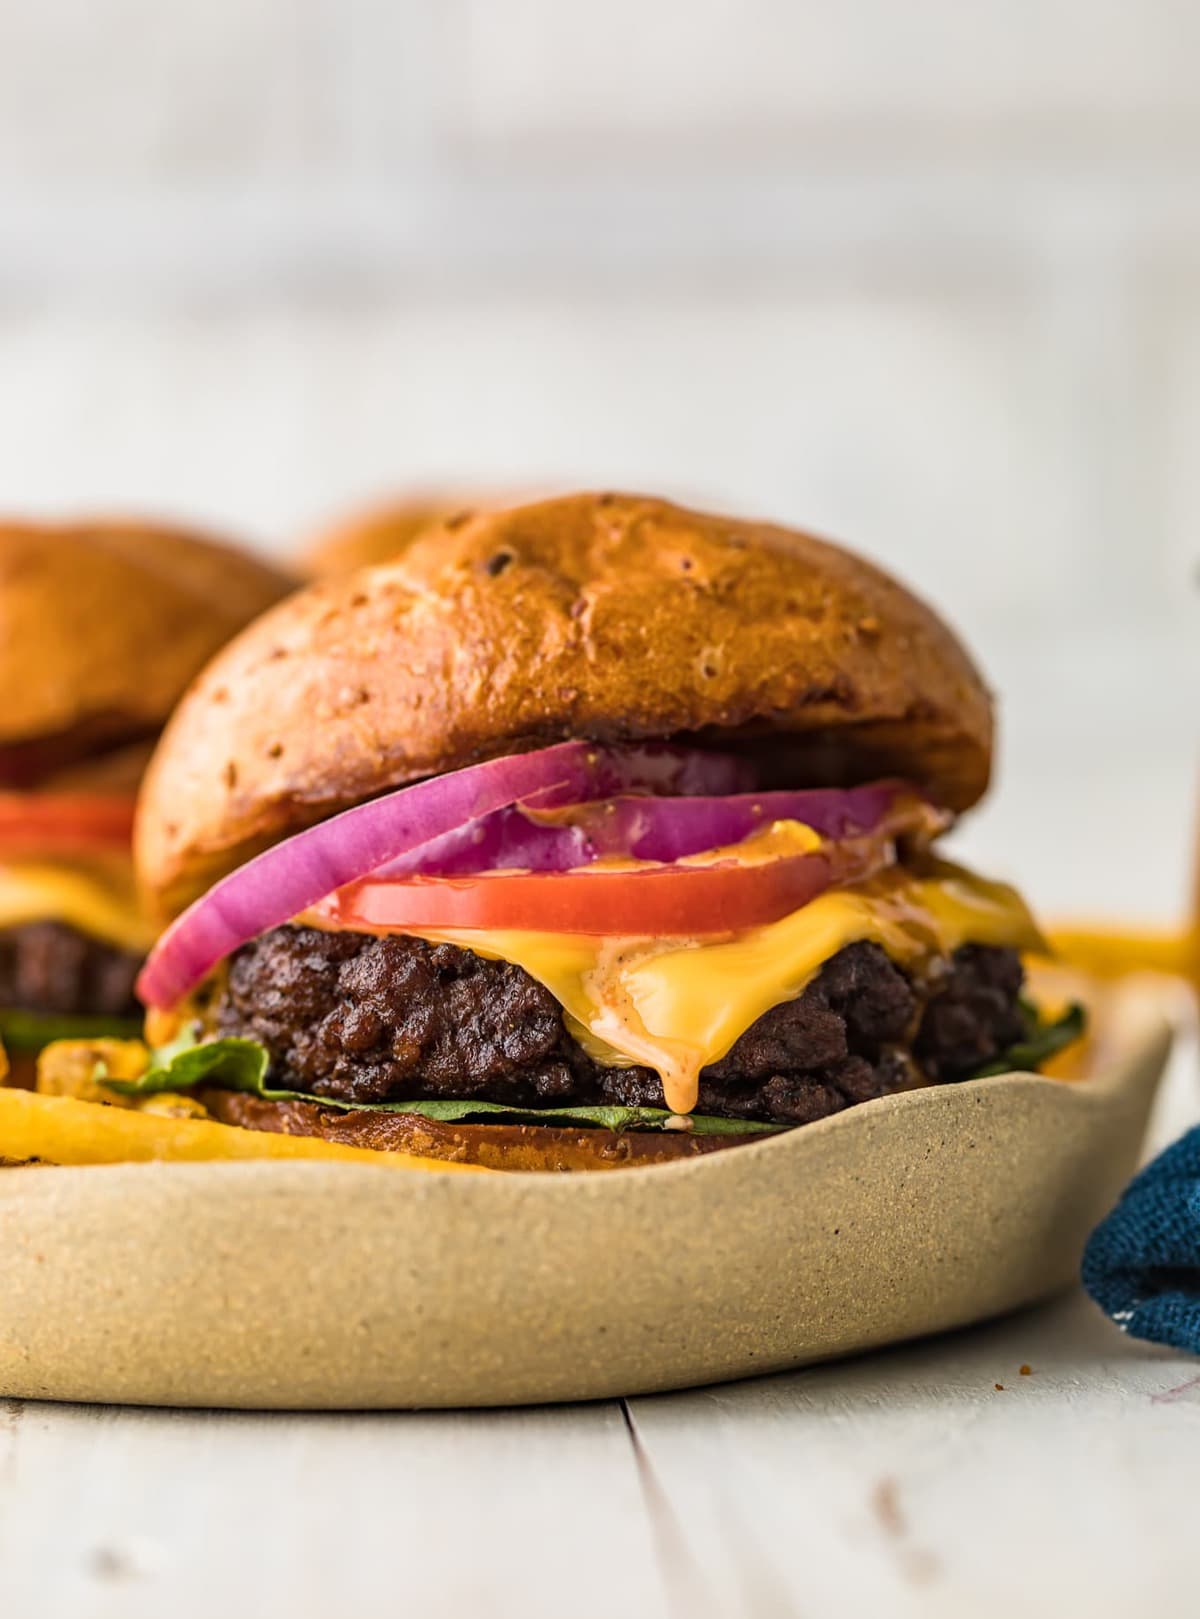 grilled juicy burgers on a buns with cheese, tomato, and red onion - one of the recipes for this week's healthy weekly meal plan